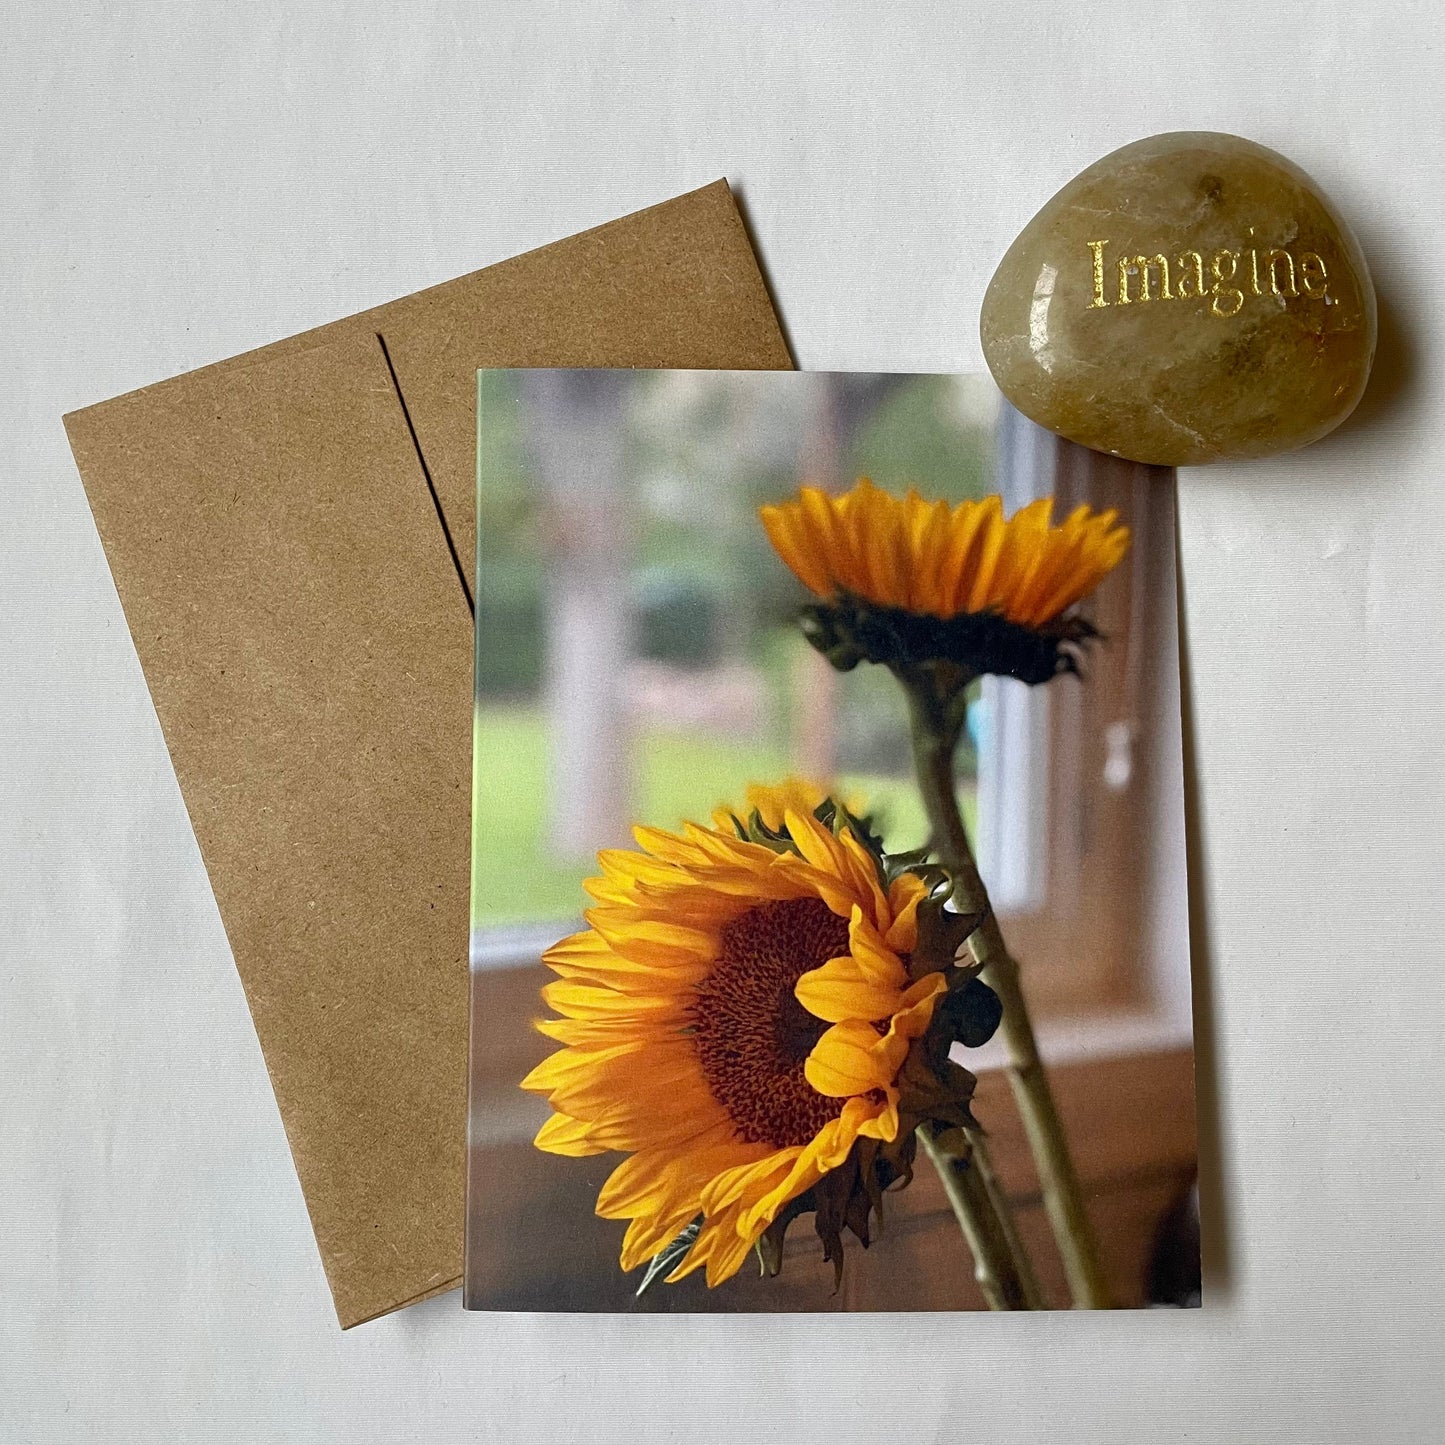 Sunflowers Still Life Original Nature Photography Greeting Card Boxed Set of 6 with Kraft Envelopes